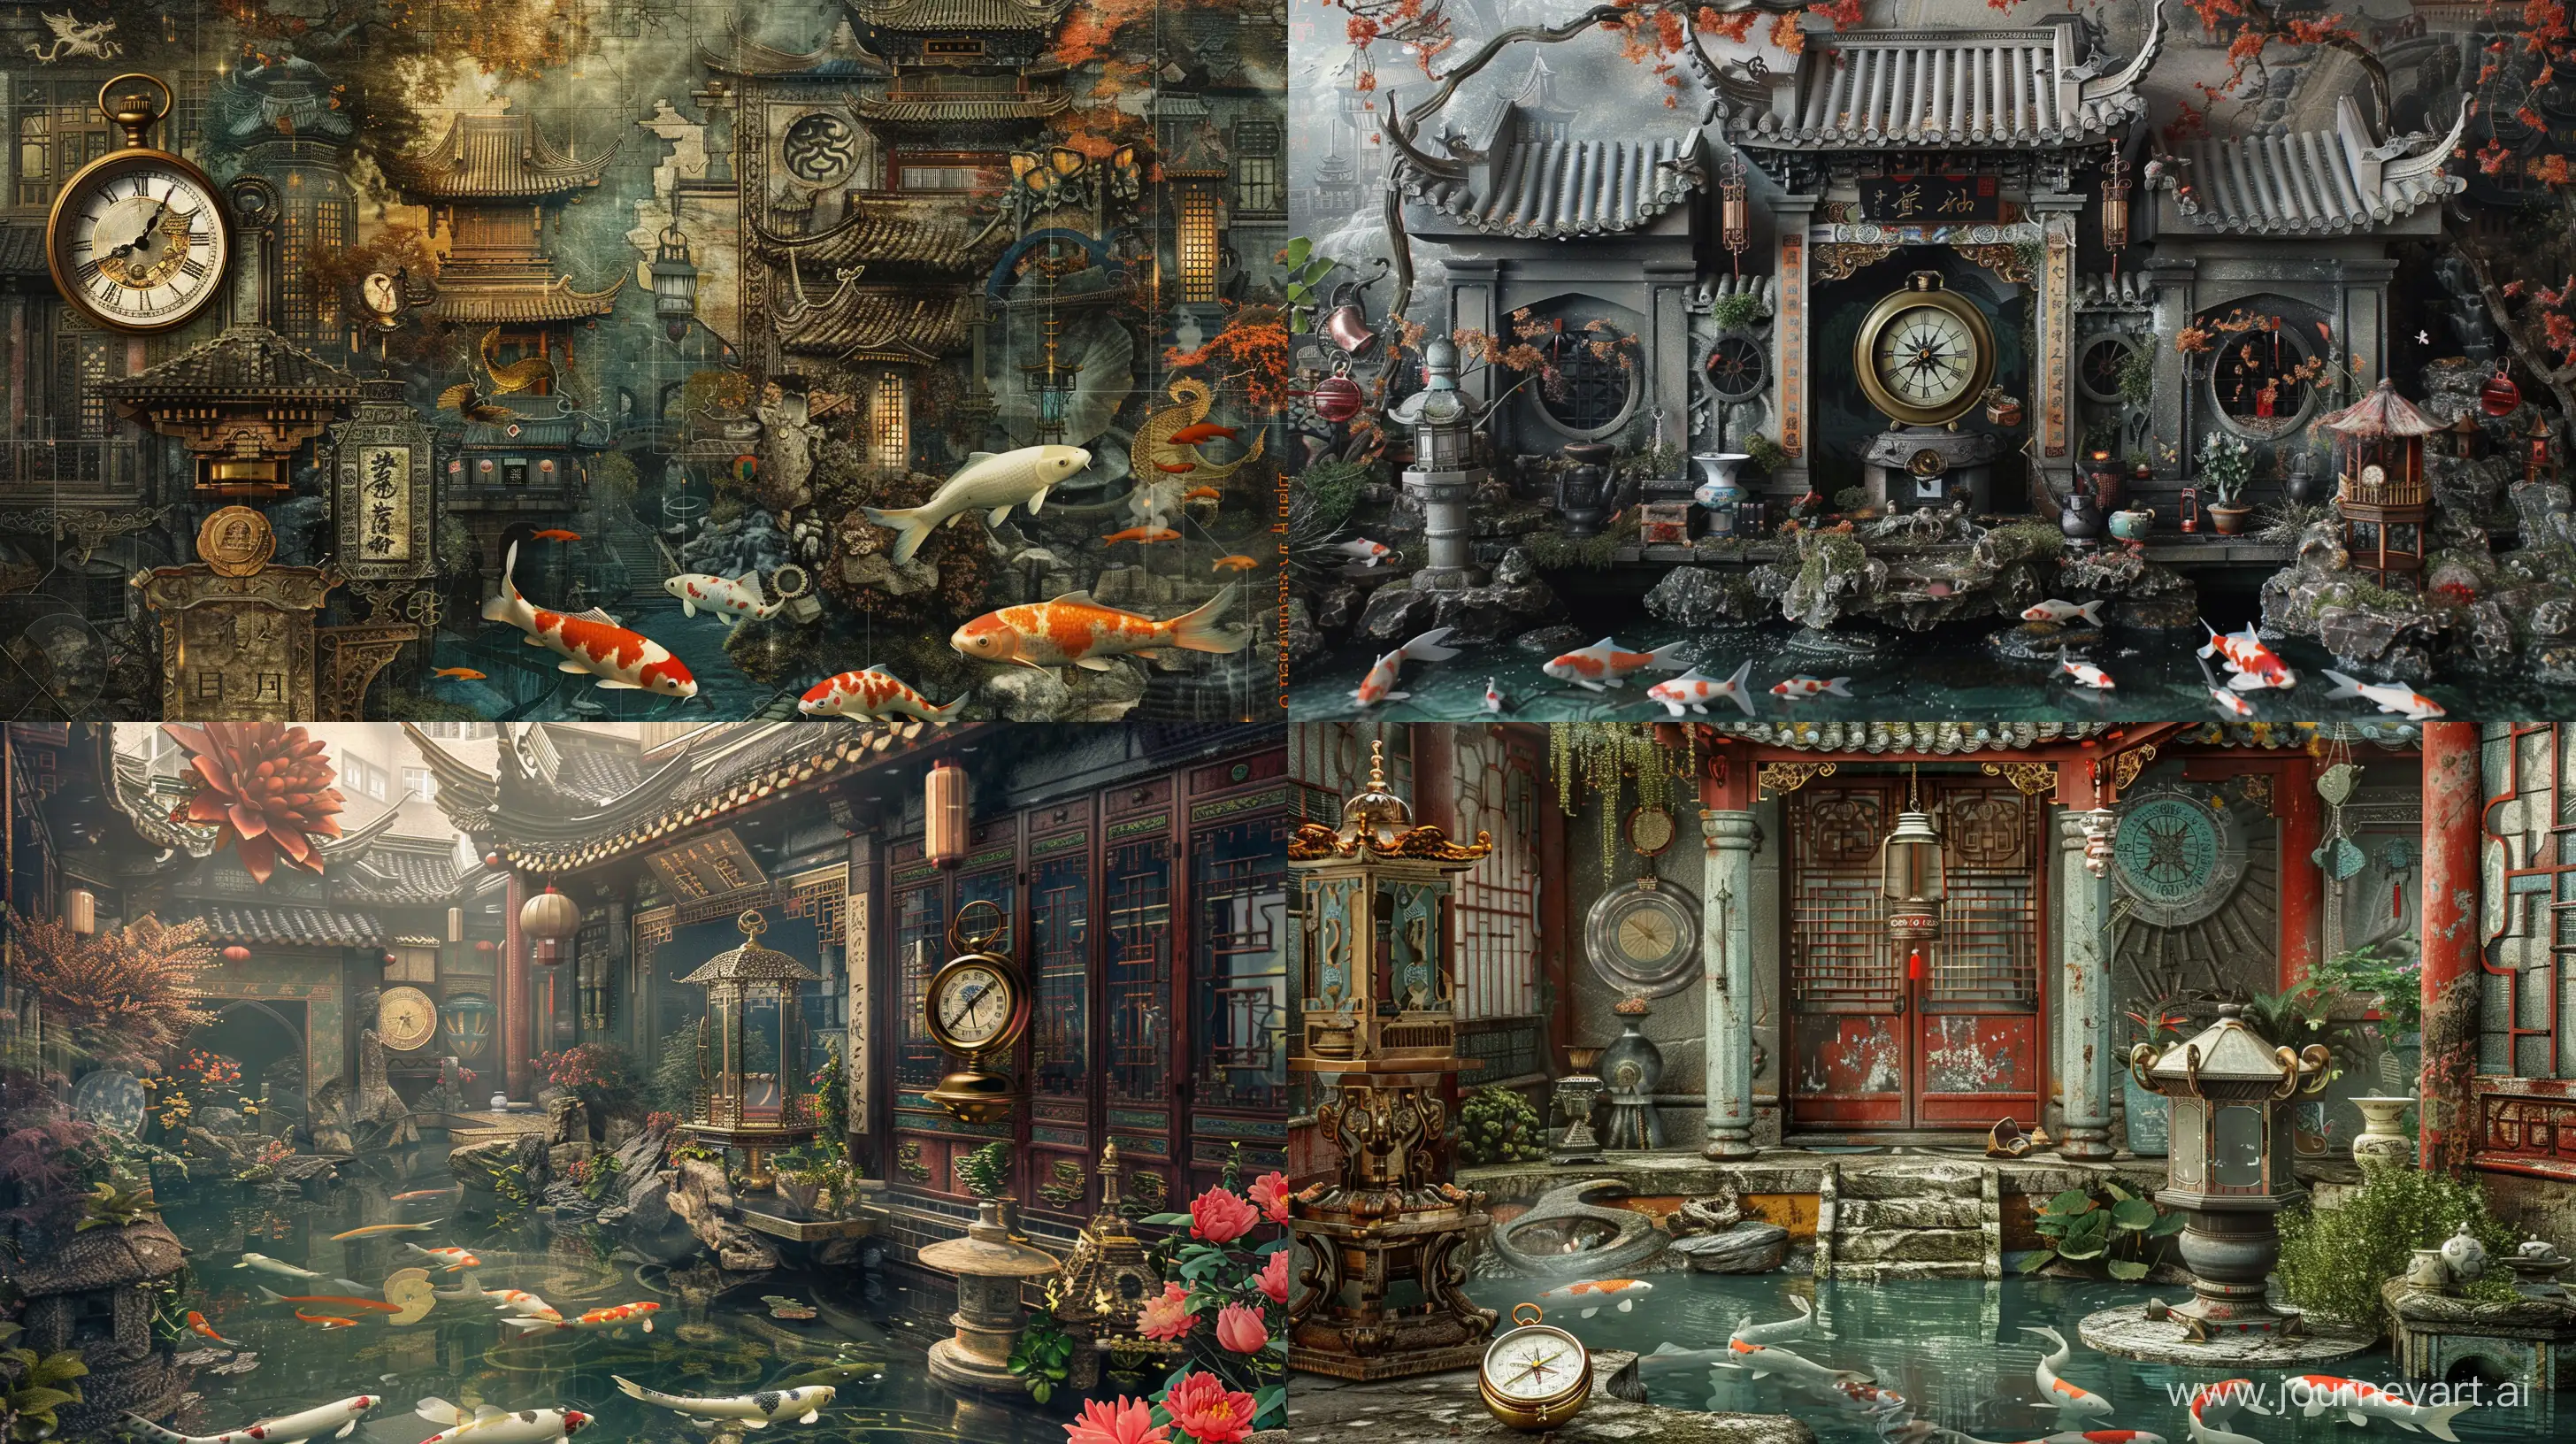 Exquisite-Painting-Masterpiece-with-Intricate-Architectural-Ornaments-and-Asian-Artifacts